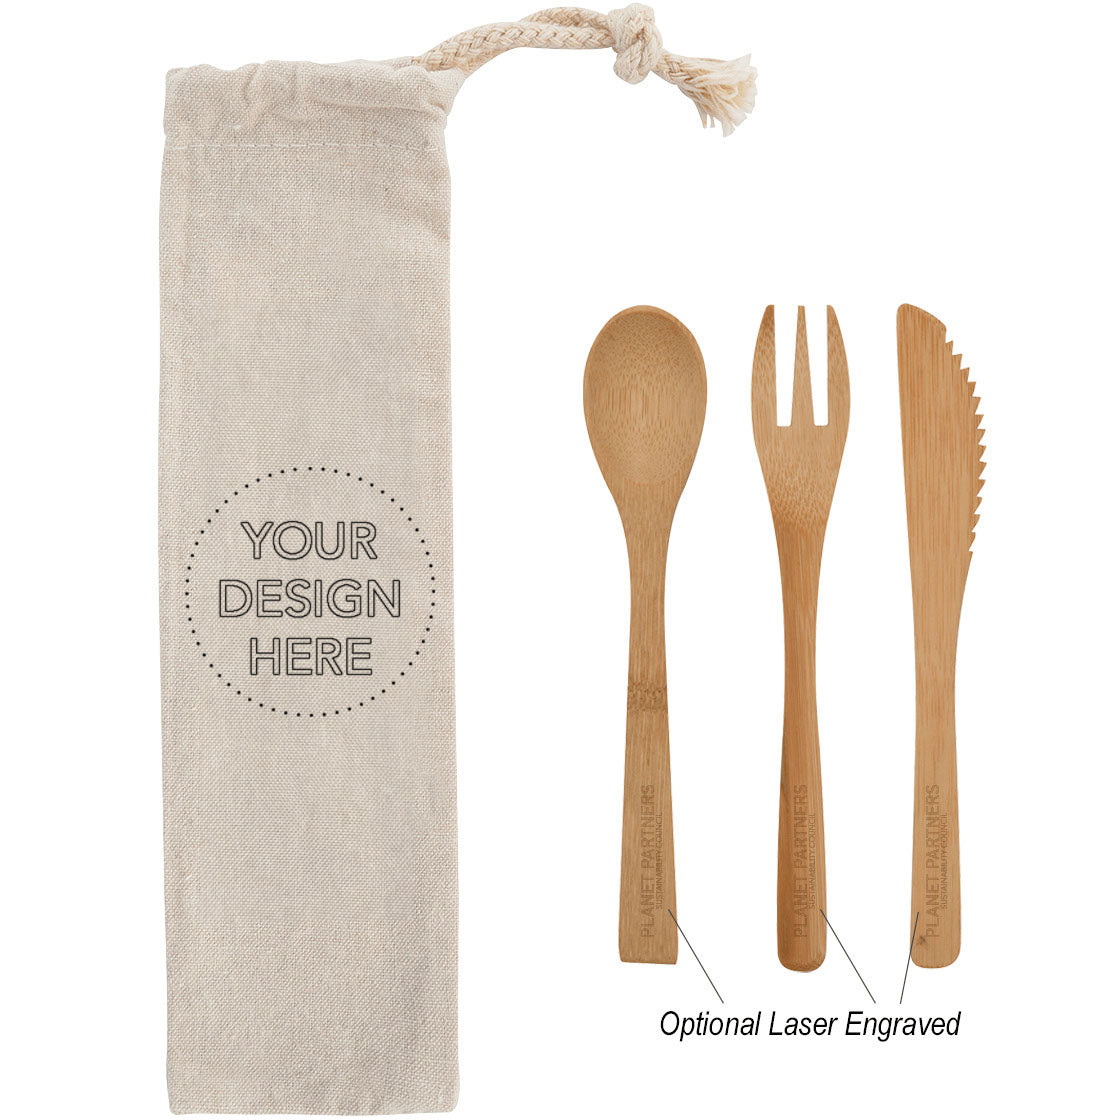 3 Piece Bamboo Utensil Set with Cotton Pouch